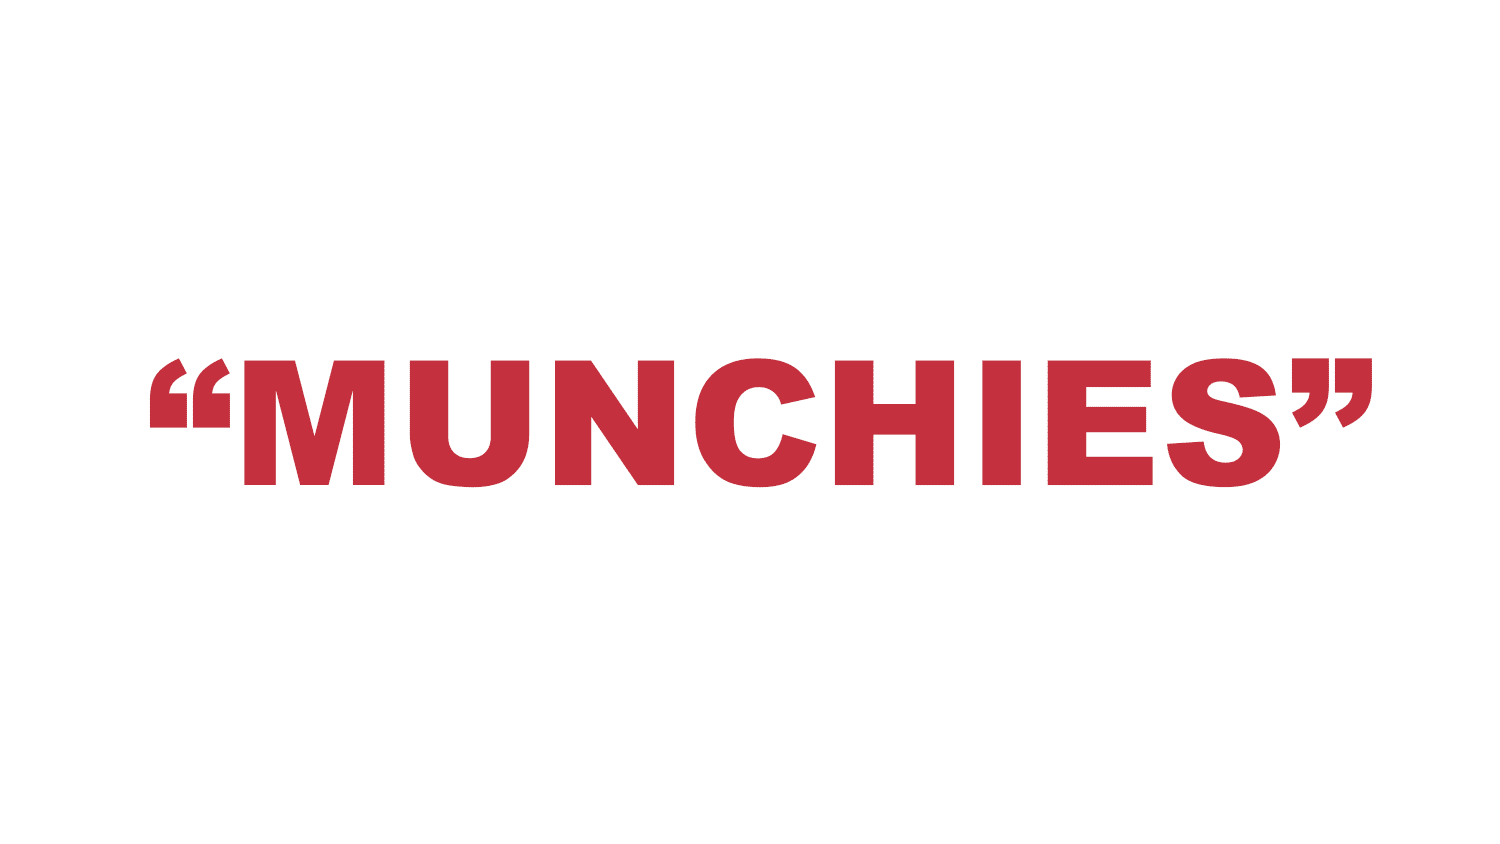 What does “Munchies” mean?